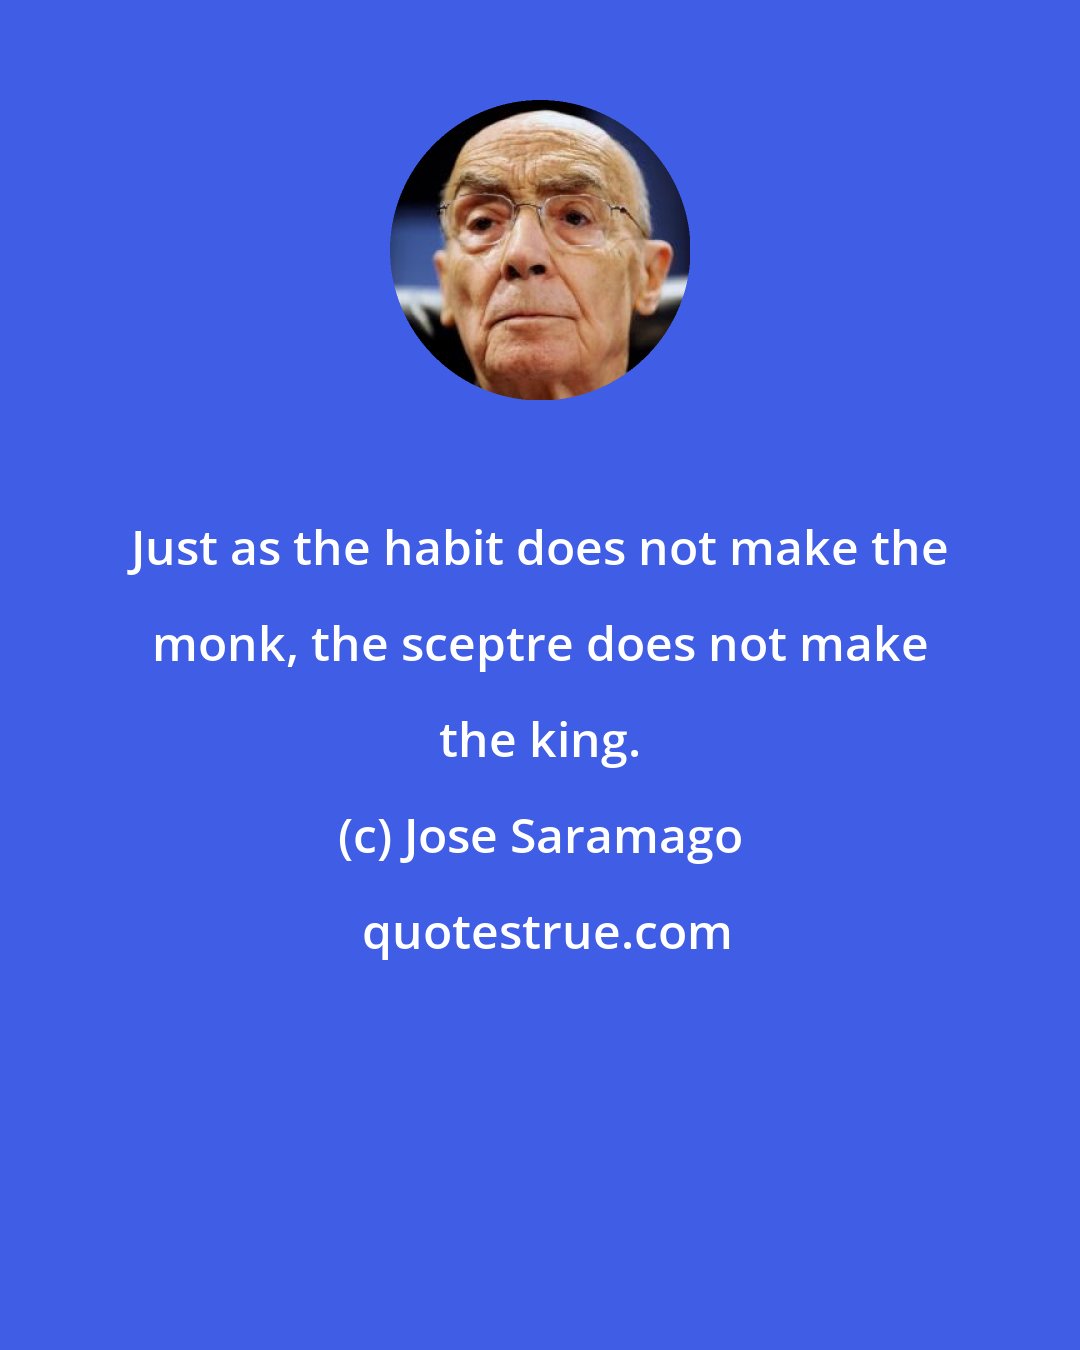 Jose Saramago: Just as the habit does not make the monk, the sceptre does not make the king.